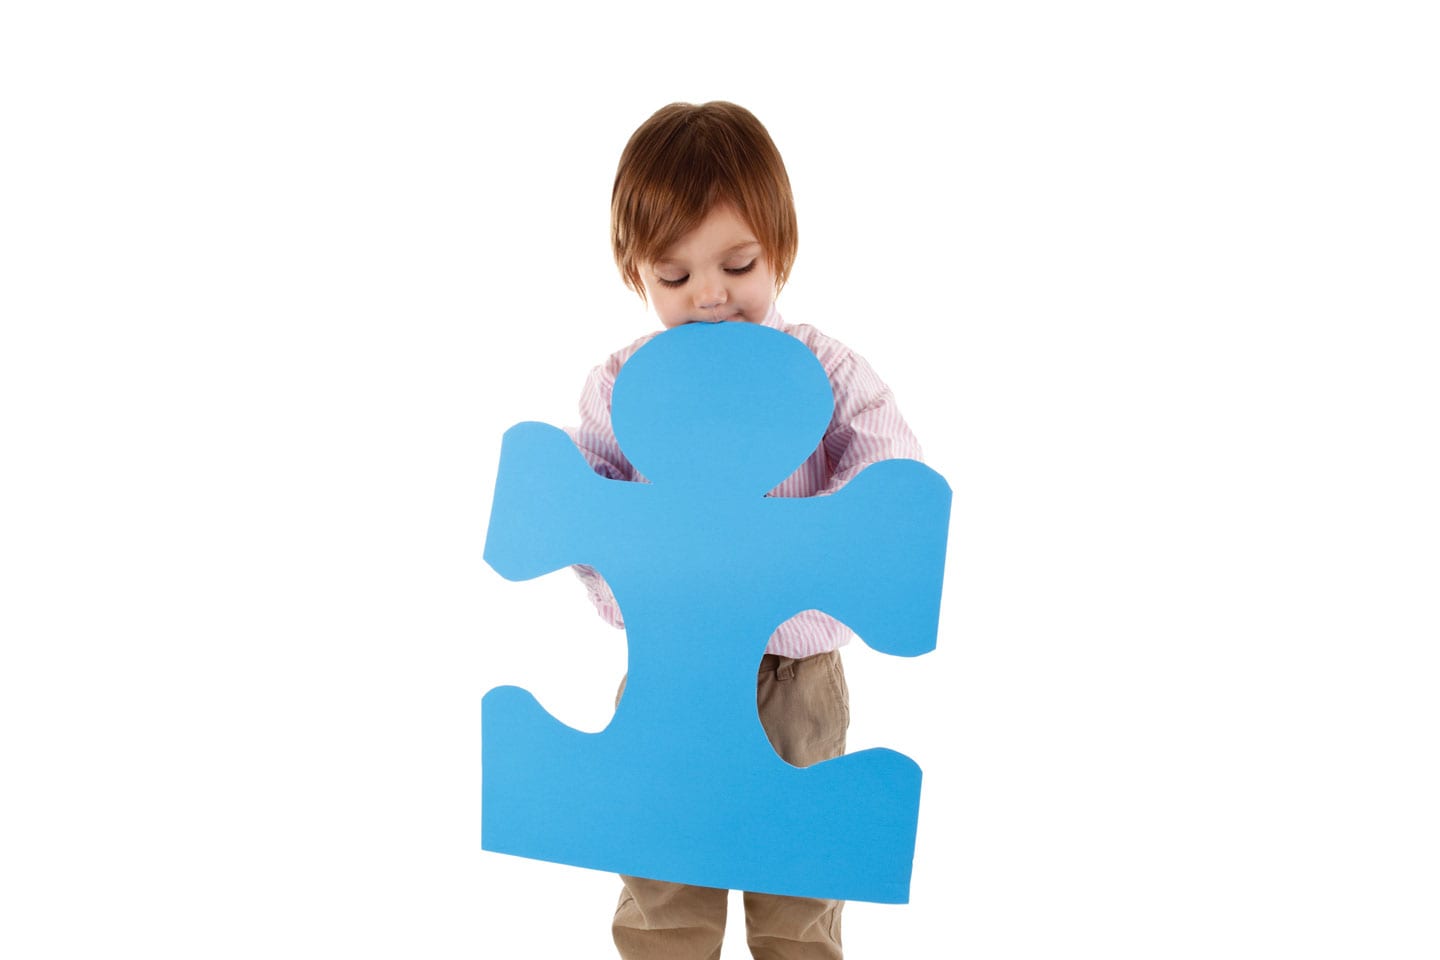 Child with giant puzzle piece